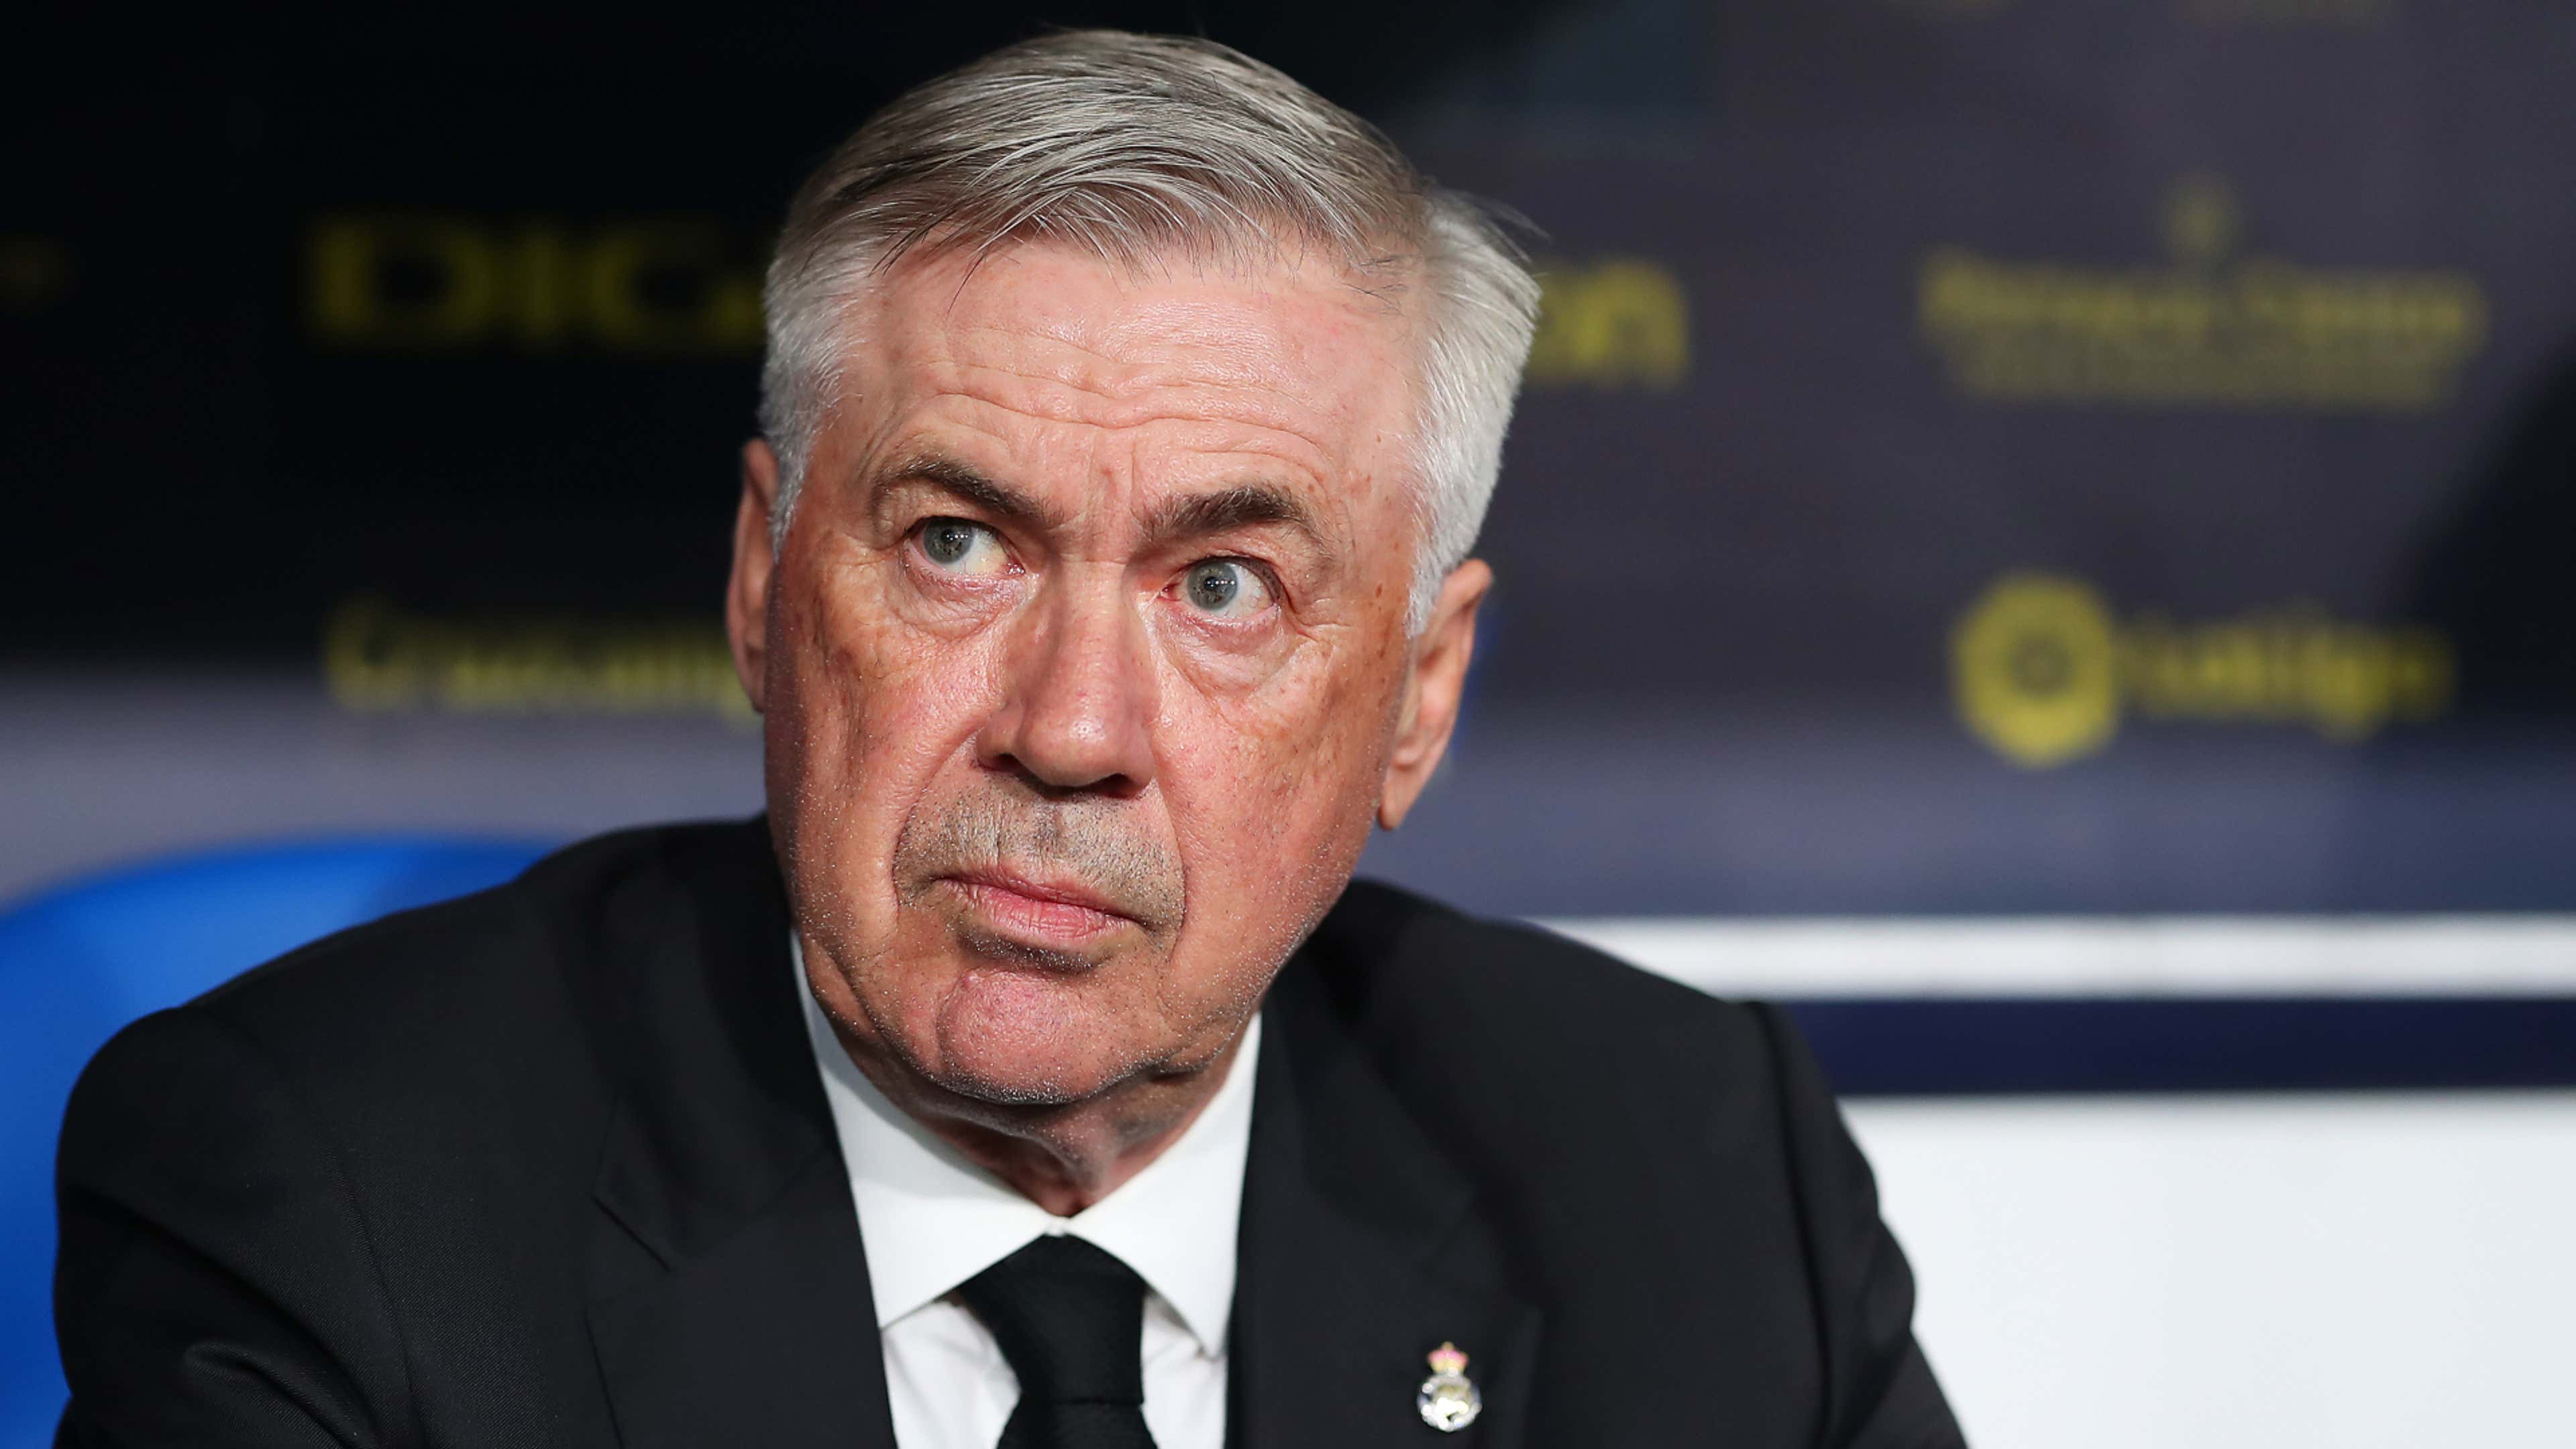 Carlo Ancelotti is heading to Brazil! CBF reaches agreement for Real Madrid  boss to take over men's national team